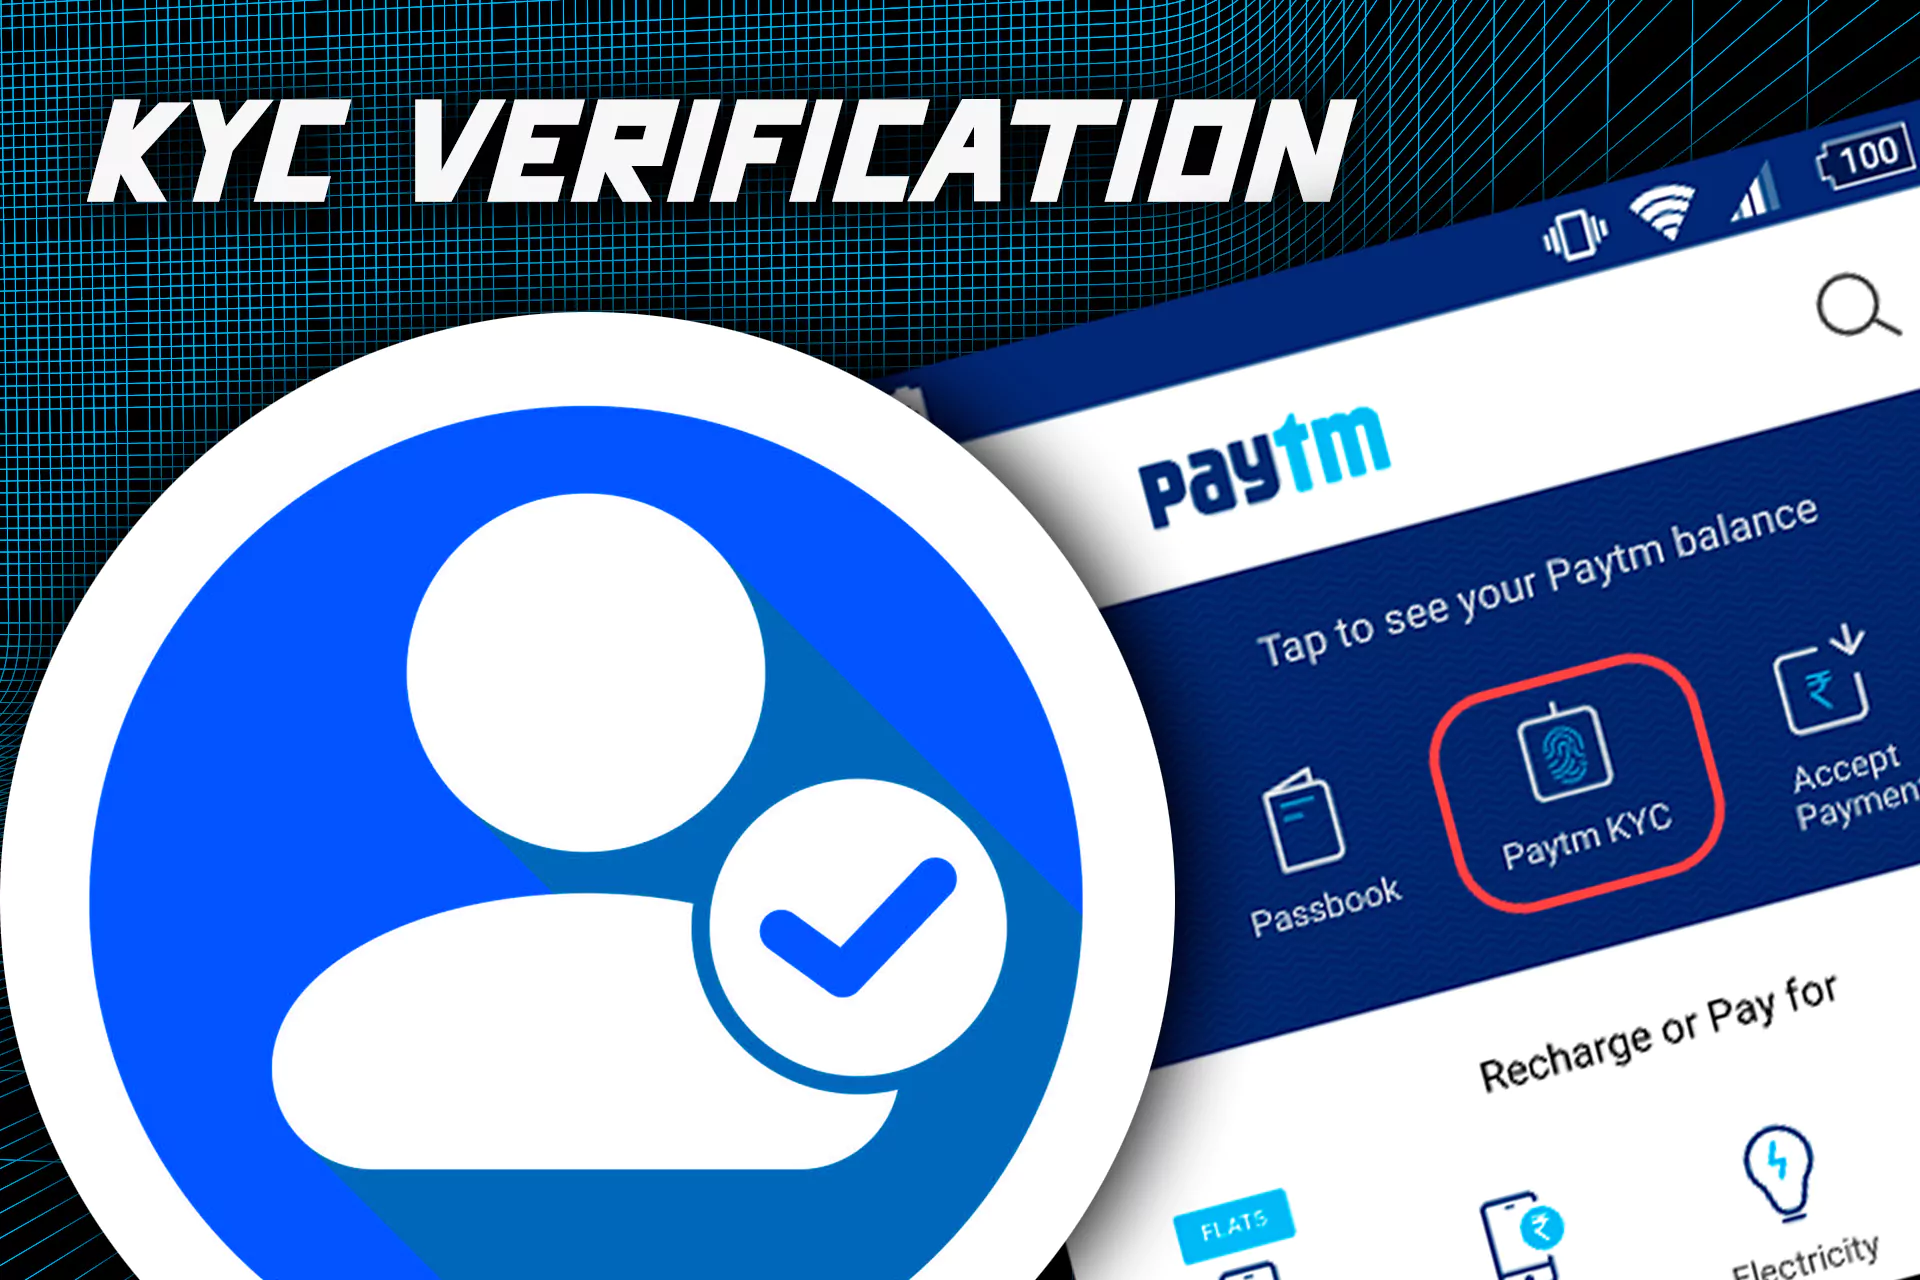 Pass the verification at the PayTM.